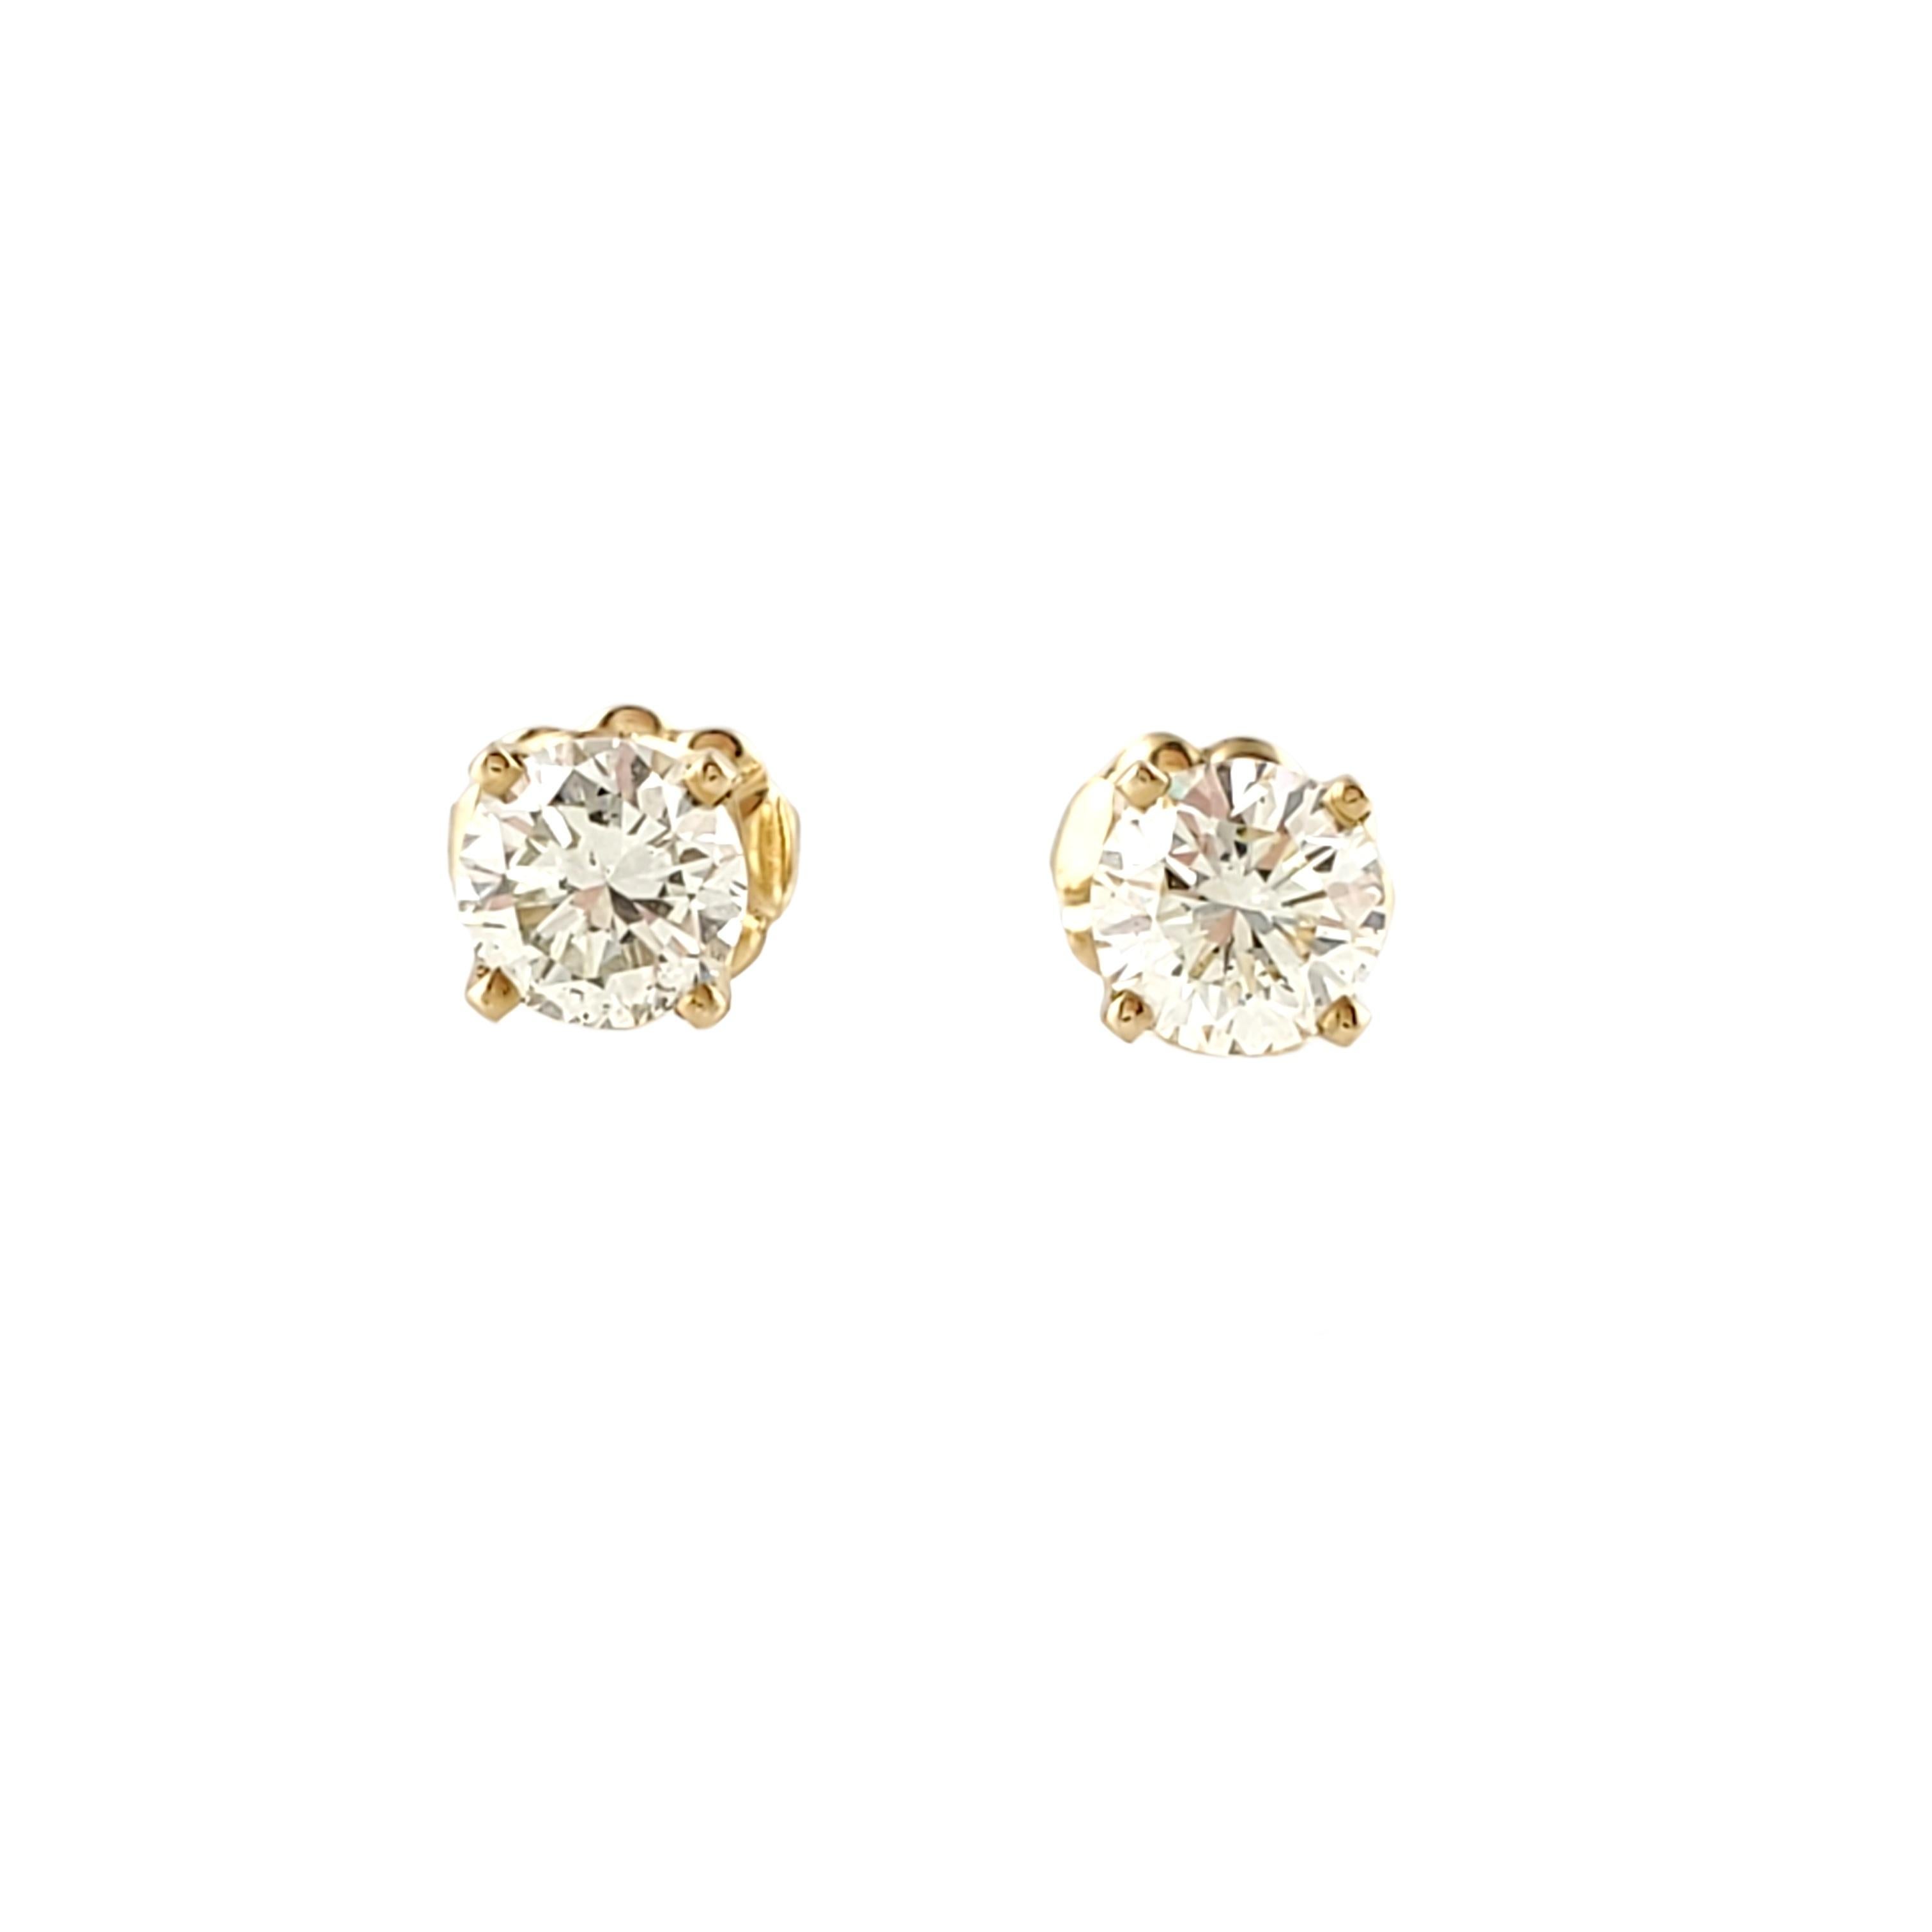 Vintage 14 Karat Yellow Gold Diamond Stud Earrings .90 ct.
These classic studs each feature one round brilliant cut diamond (.45 ct.) in a yellow gold four prong setting. Push back closures. Approximate total diamond weight: .90 ct. Diamond clarity: